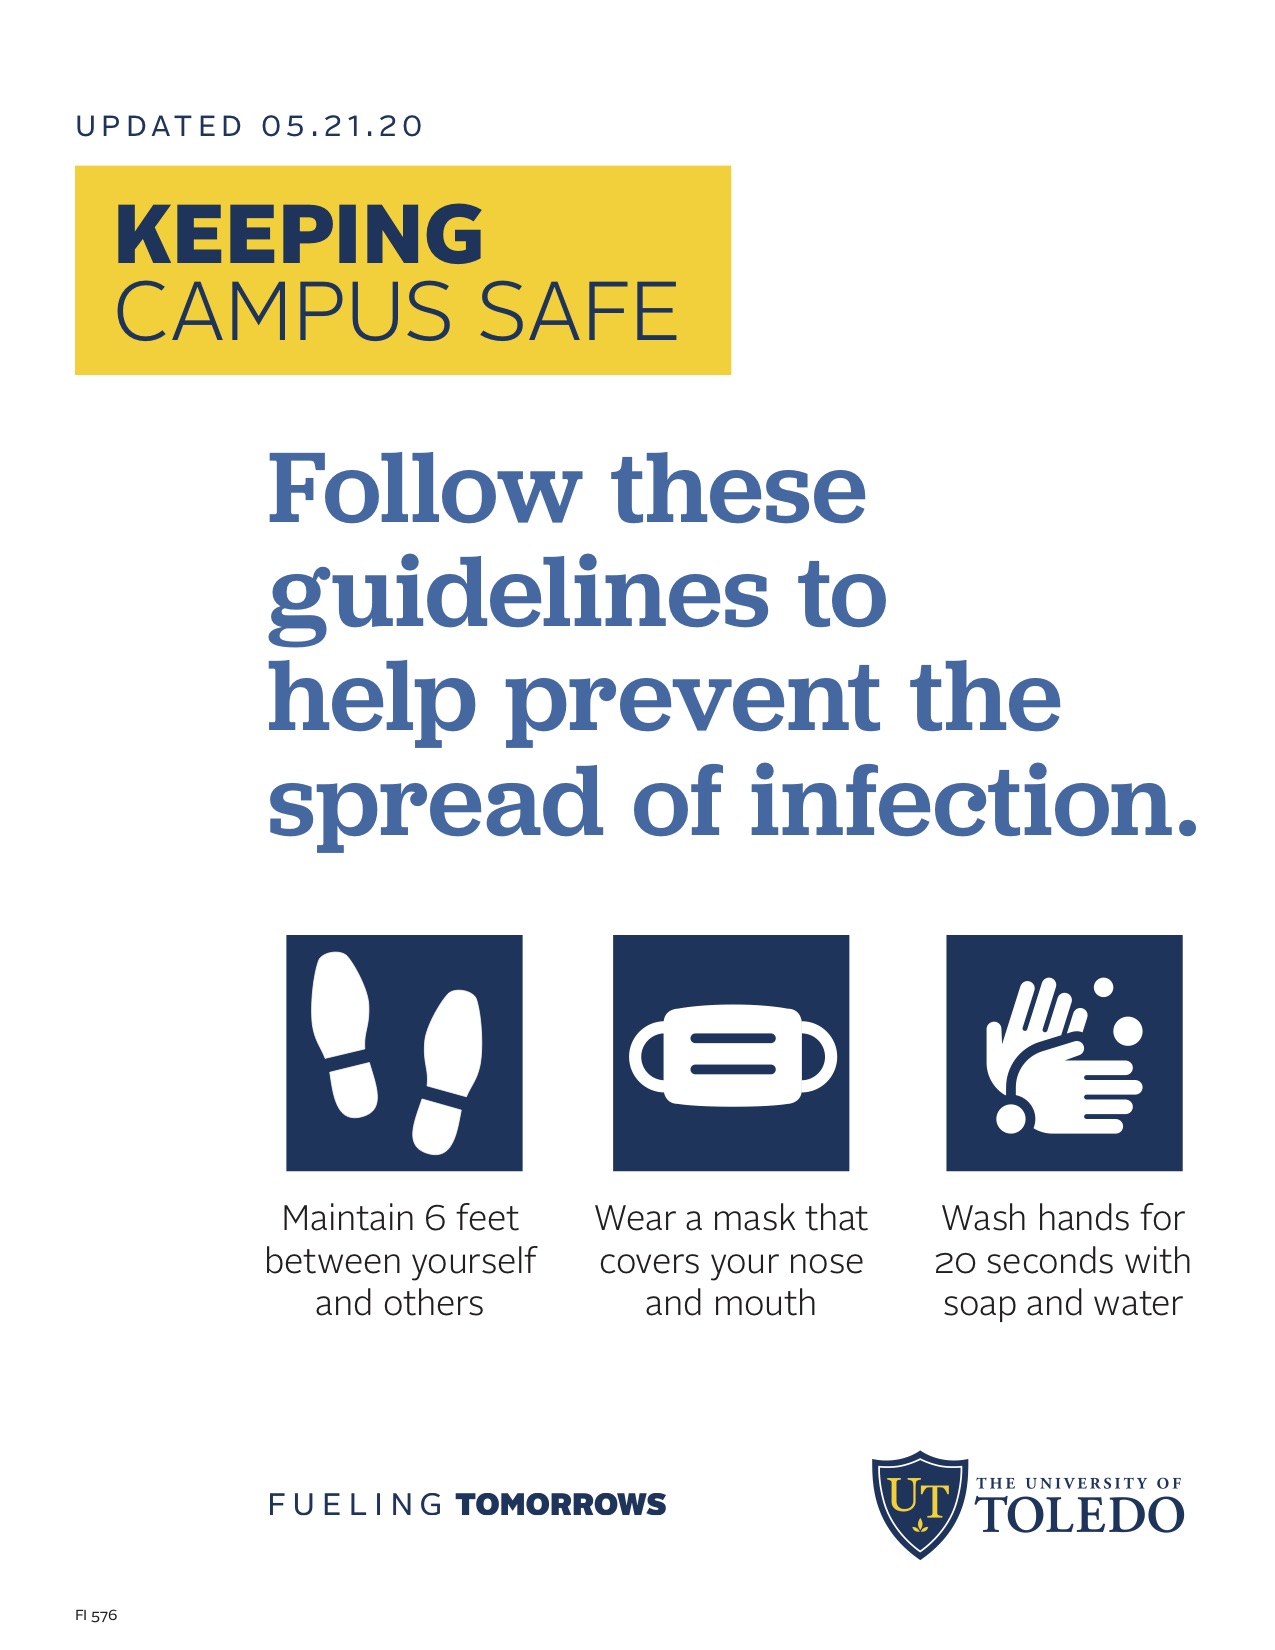 Guidelines to prevent spread of infection